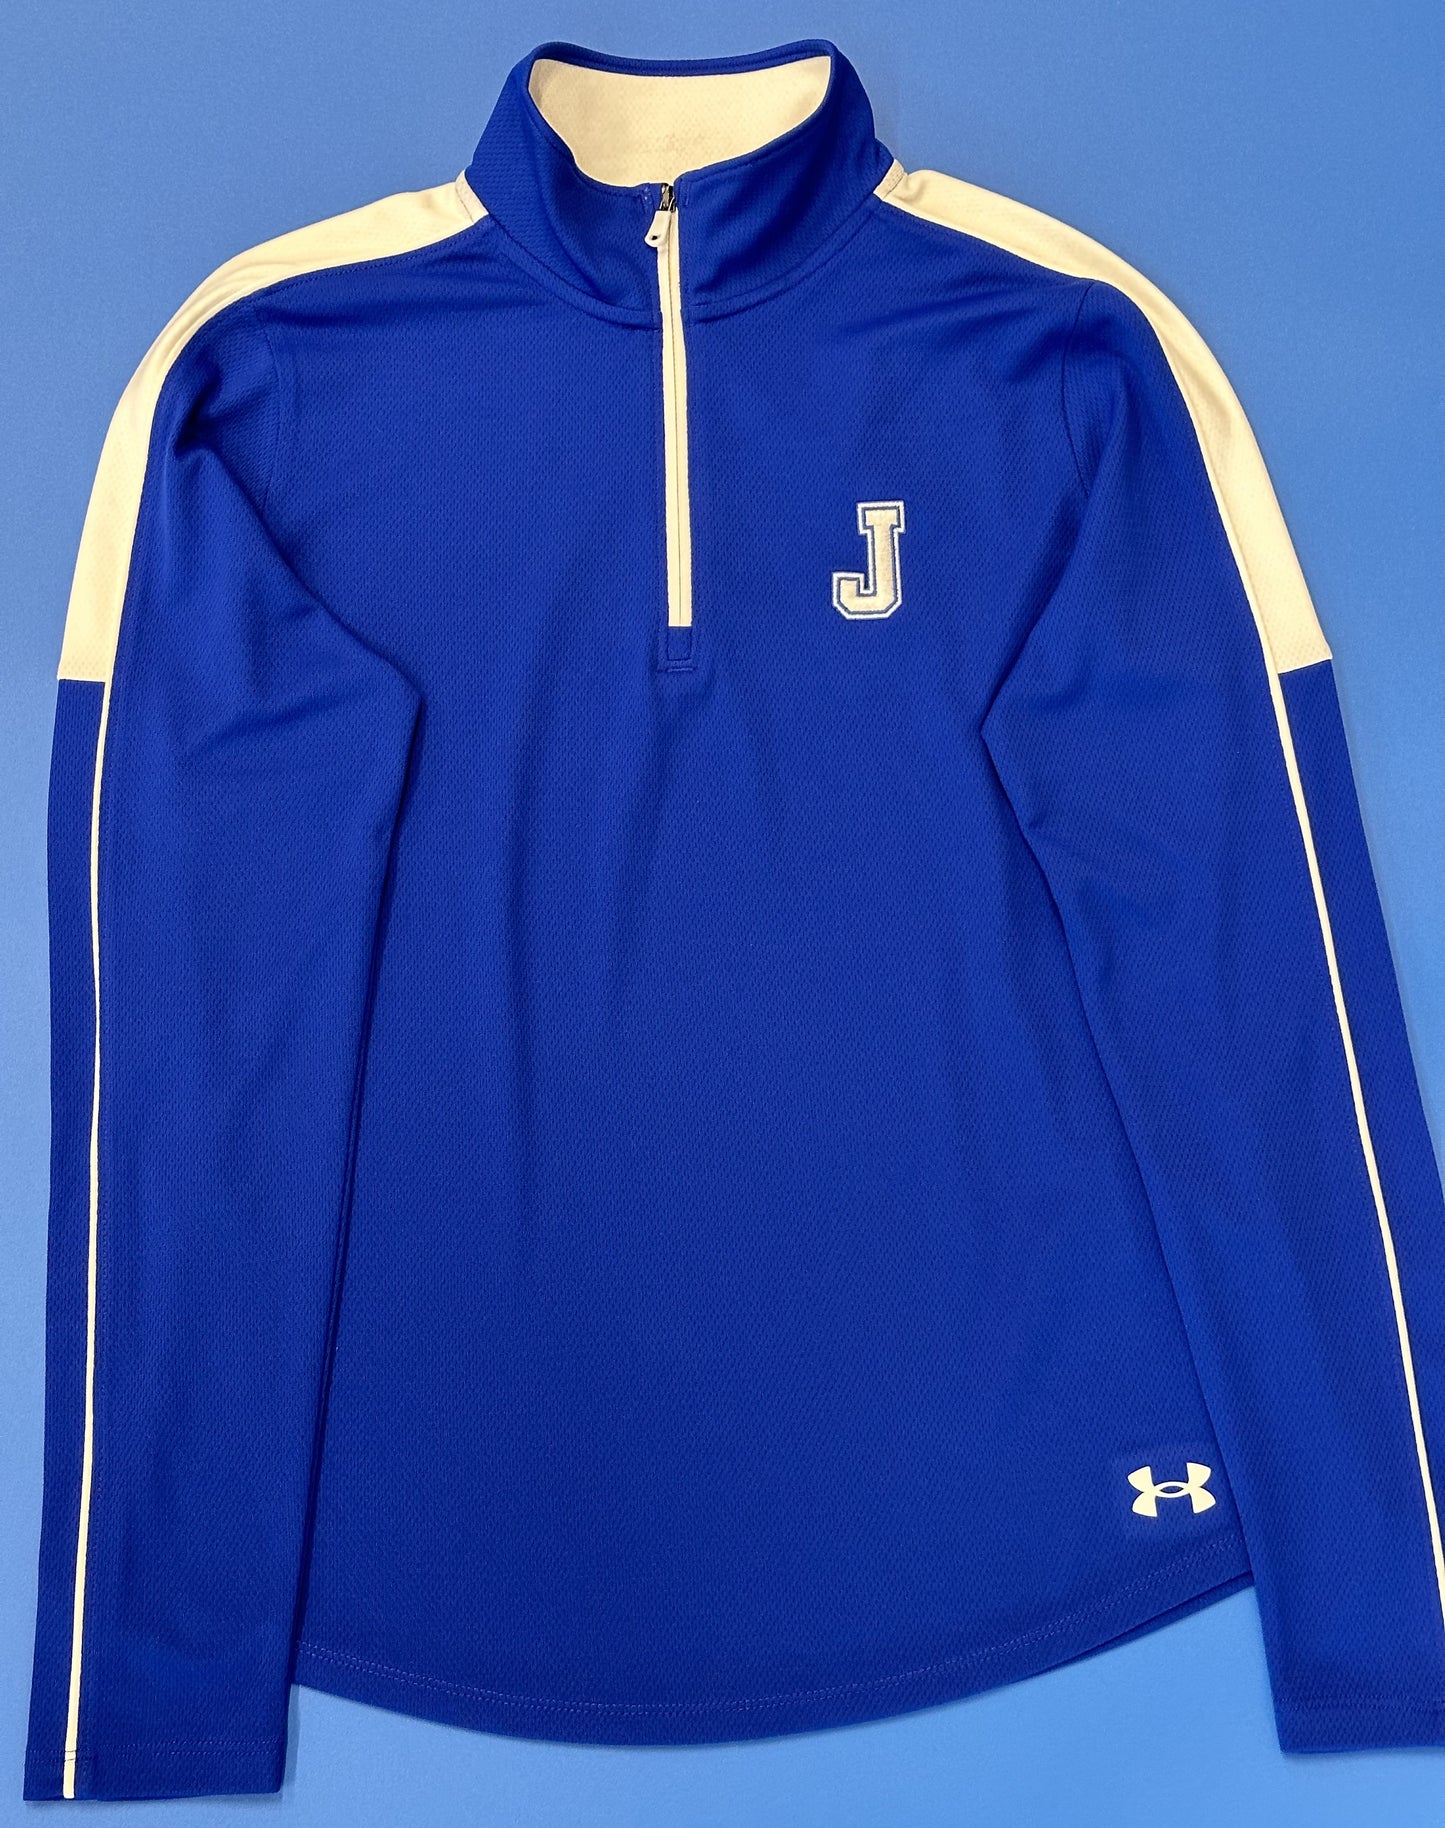 Under Armour.  100% Polyester.  Soft ant-pick, anti-pill fabric has cleaner, snag-free finish.  4-way stretch construction moves better in every direction. Material wicks sweat & dries really fast.   Embroidered J logo.